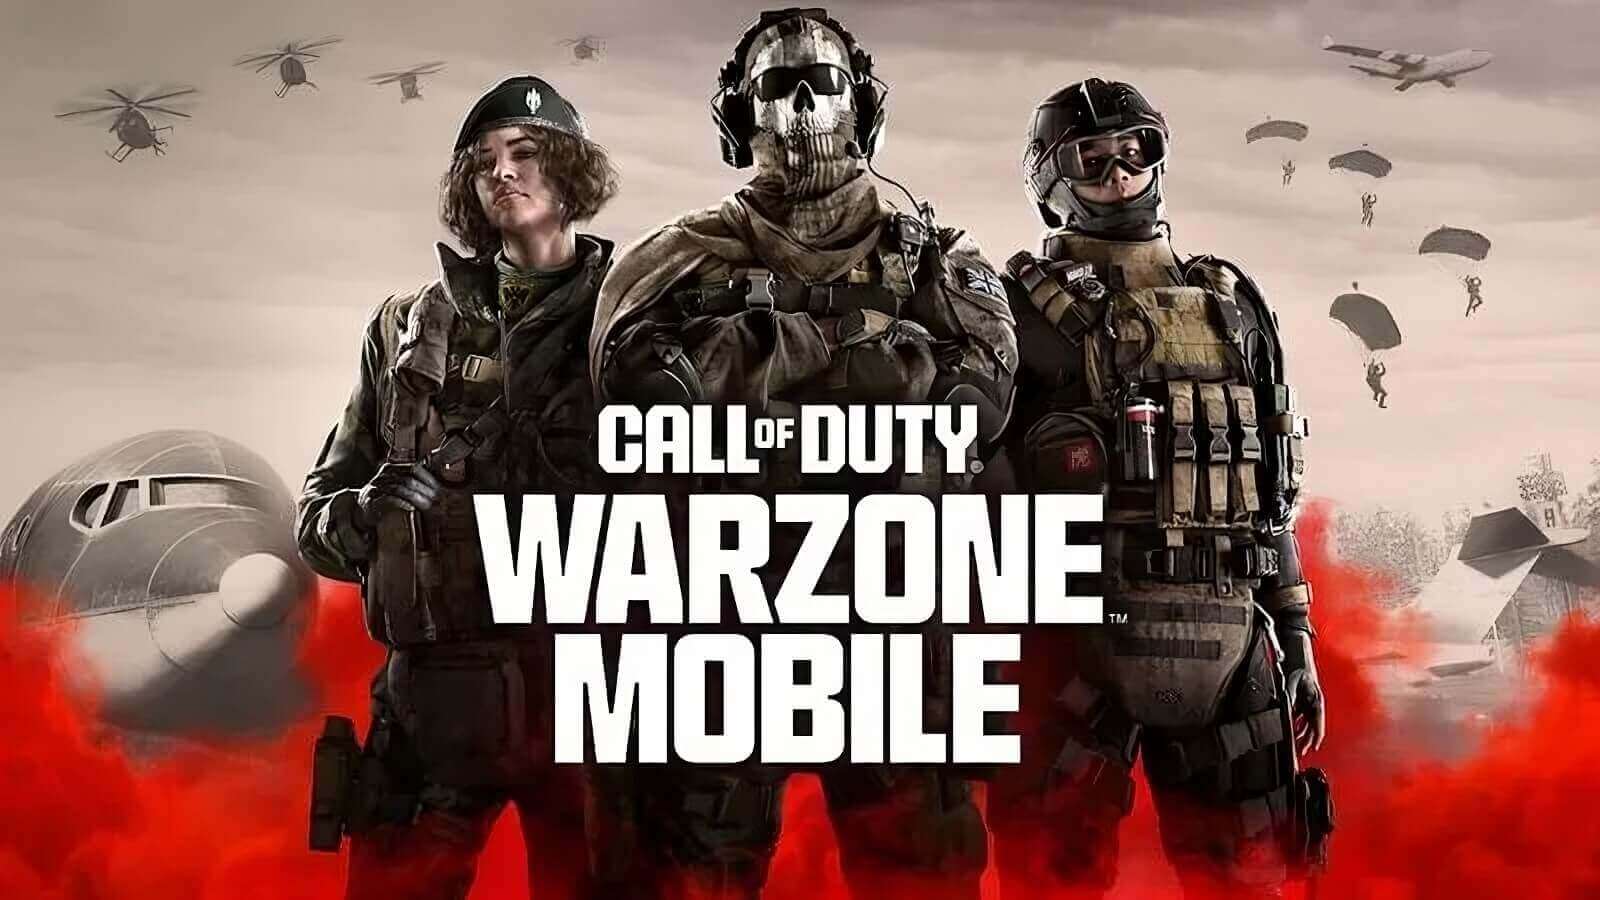 Call of Duty: Warzone Mobile “Peak” Graphics Upgrade: What You Need to Know